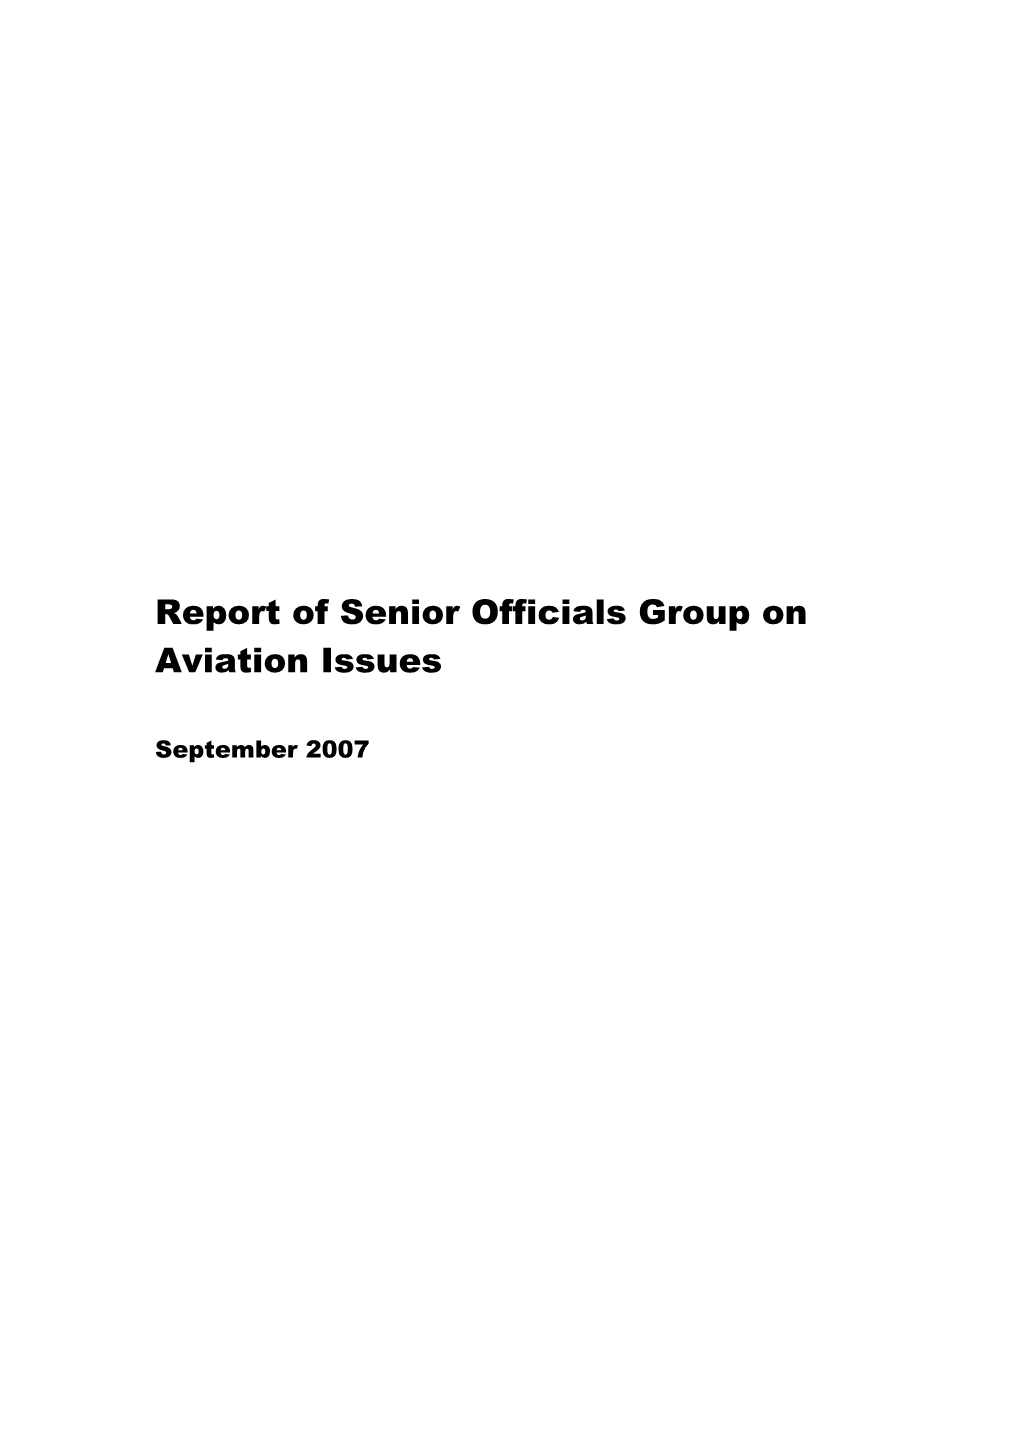 Report of Senior Officials Group on Aviation Issues